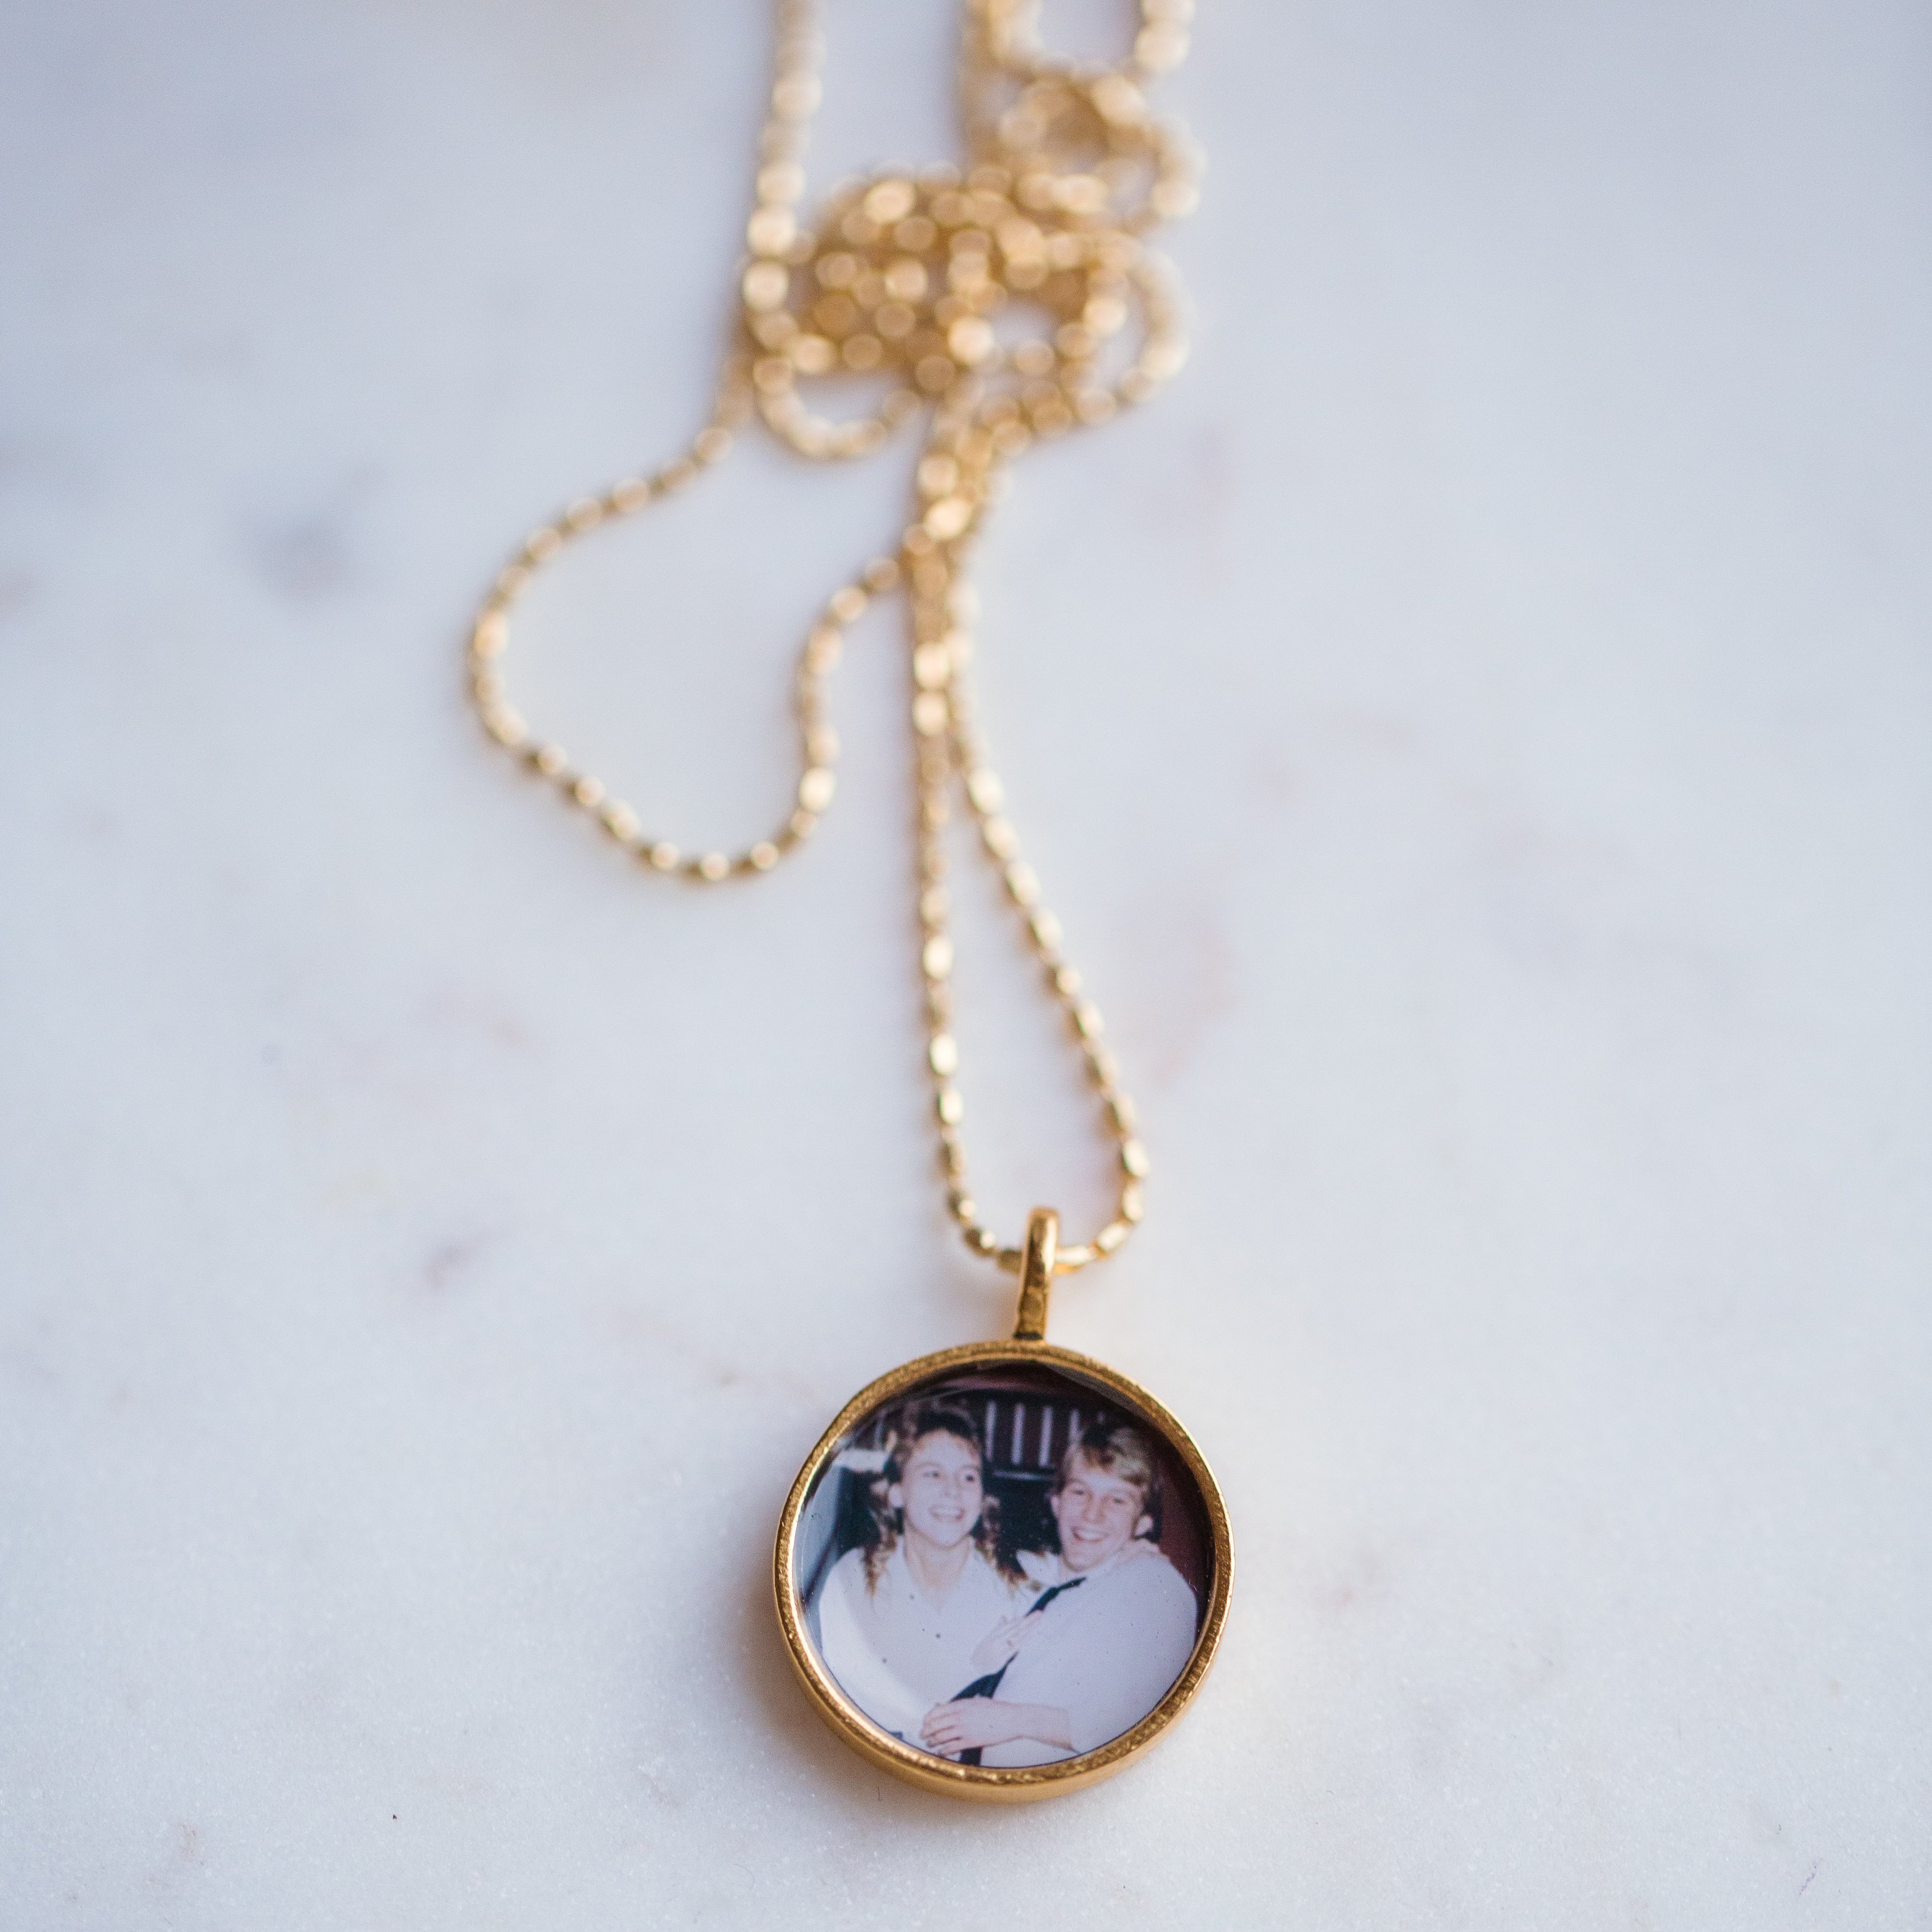 The Gold Penny Locket, a round pendant with a photo inside